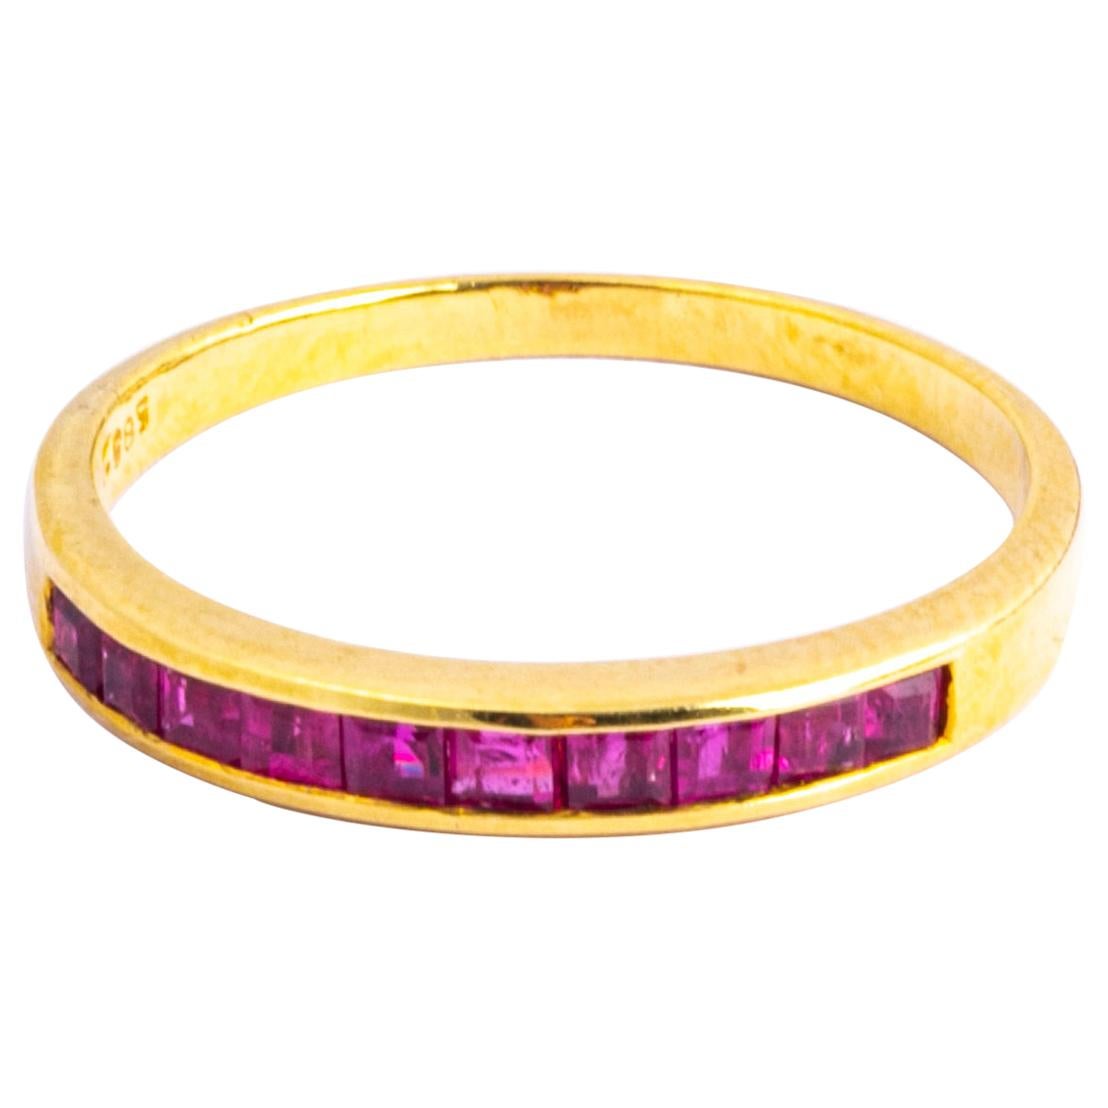 Vintage Ruby and 9 Carat Gold Half Eternity Band